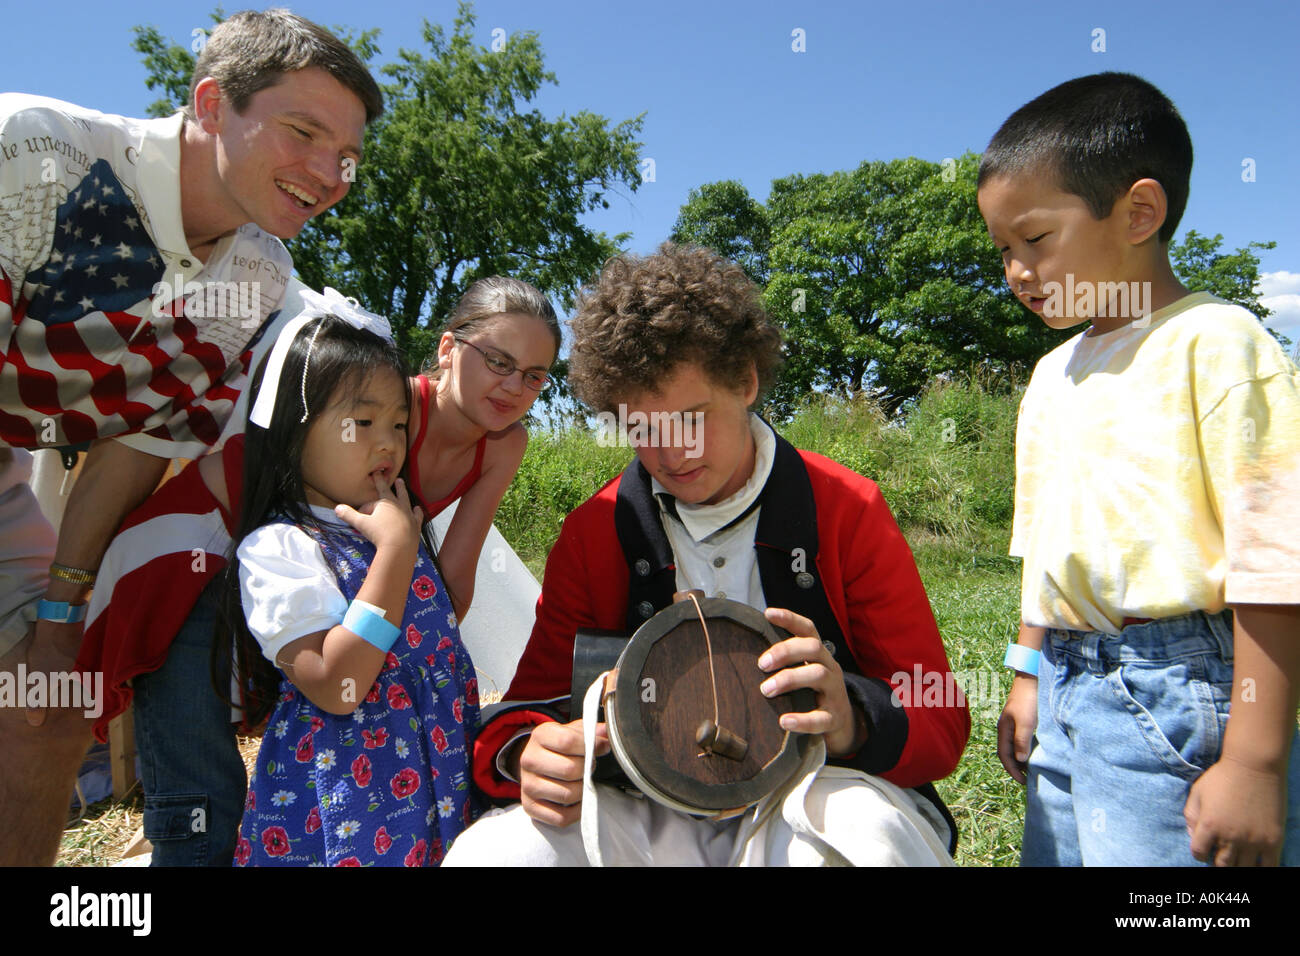 Ohio Perrysburg,Fort Meigs historic Site,Muster on the Maumee,costume,regalia,soldier,Asian Asians ethnic immigrant immigrants minority,girl girls,you Stock Photo